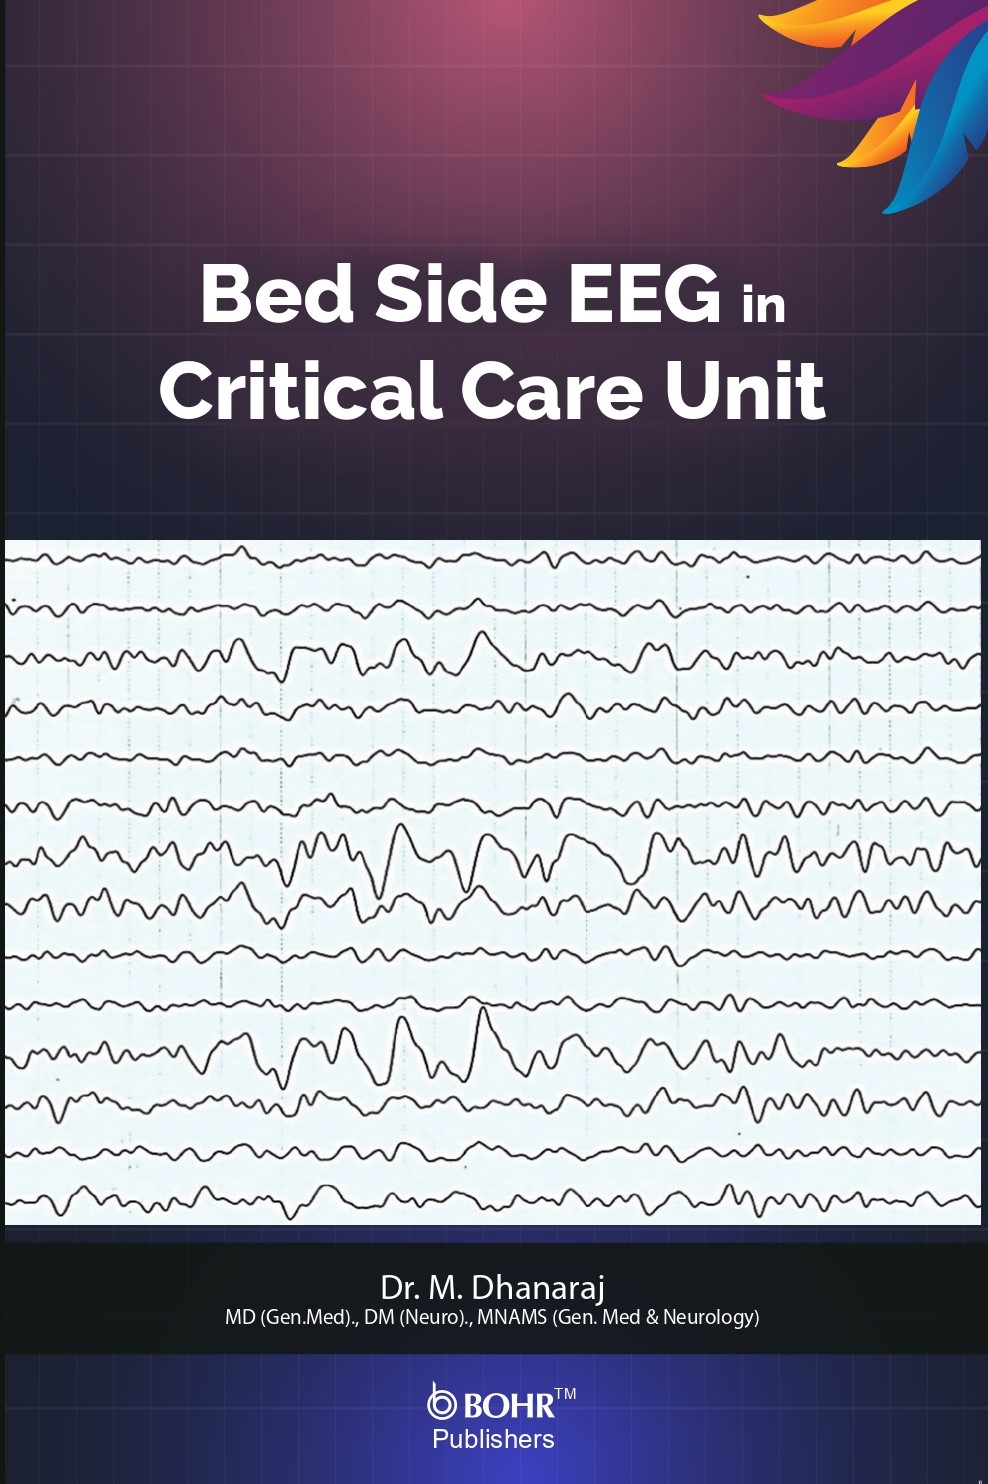 Bed Side EEG in Critical Care Unit